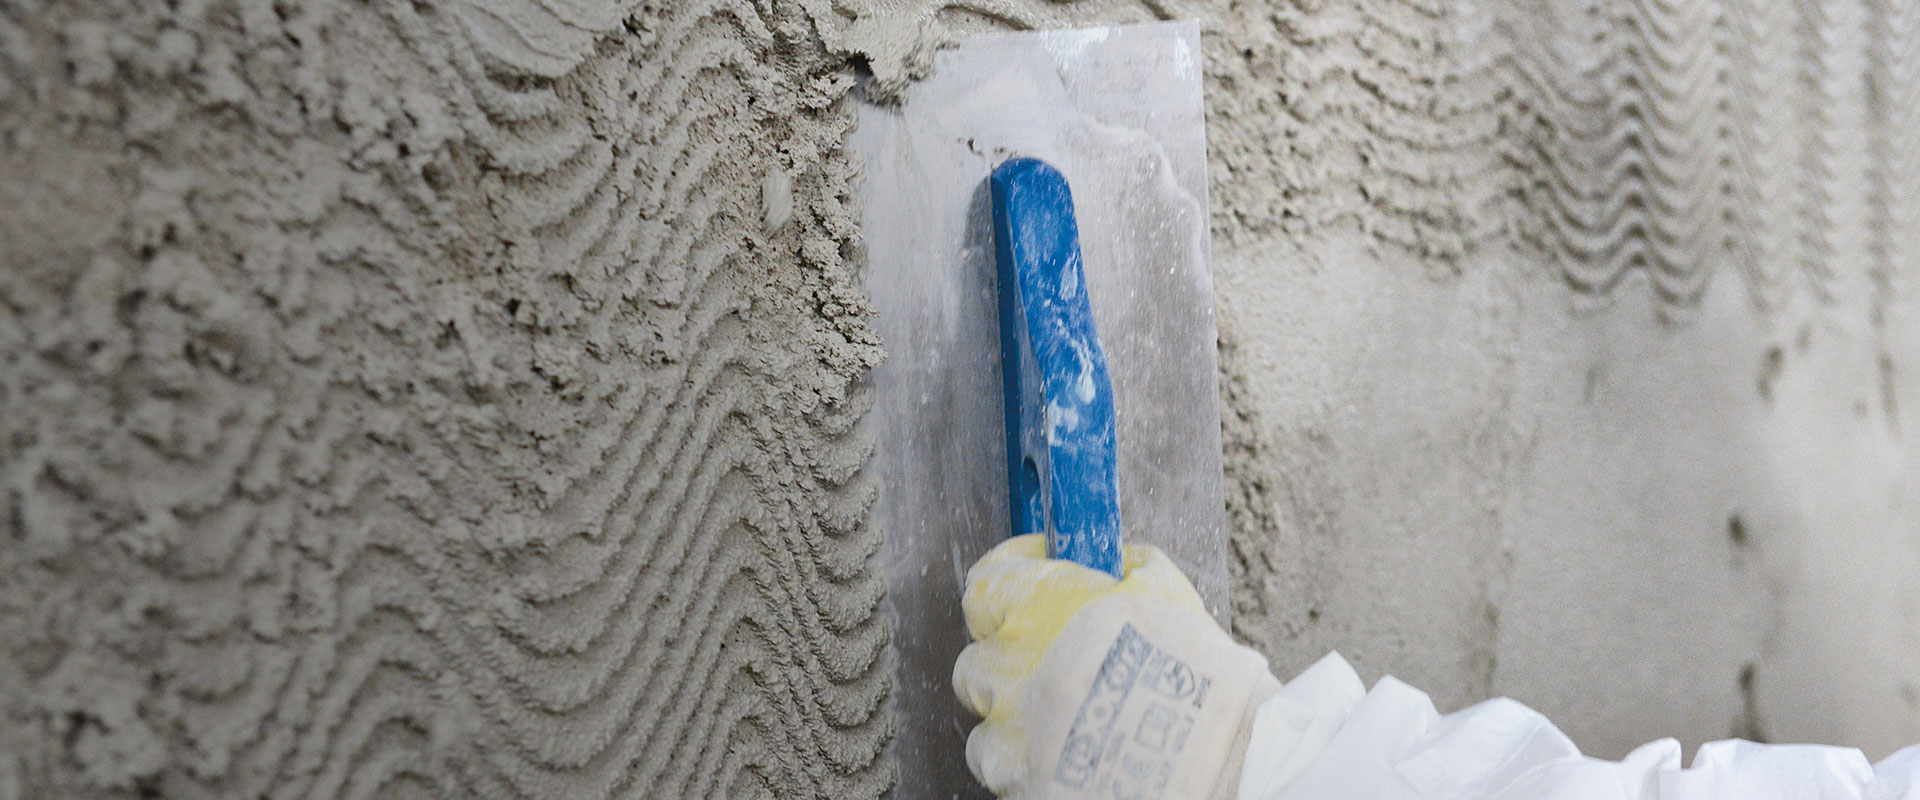 MC-Bauchemie's new Elegant MRP moisture regulating plaster and render is suitable for low-salt-laden and damp masonry up to a mois-ture penetration level of 95%.